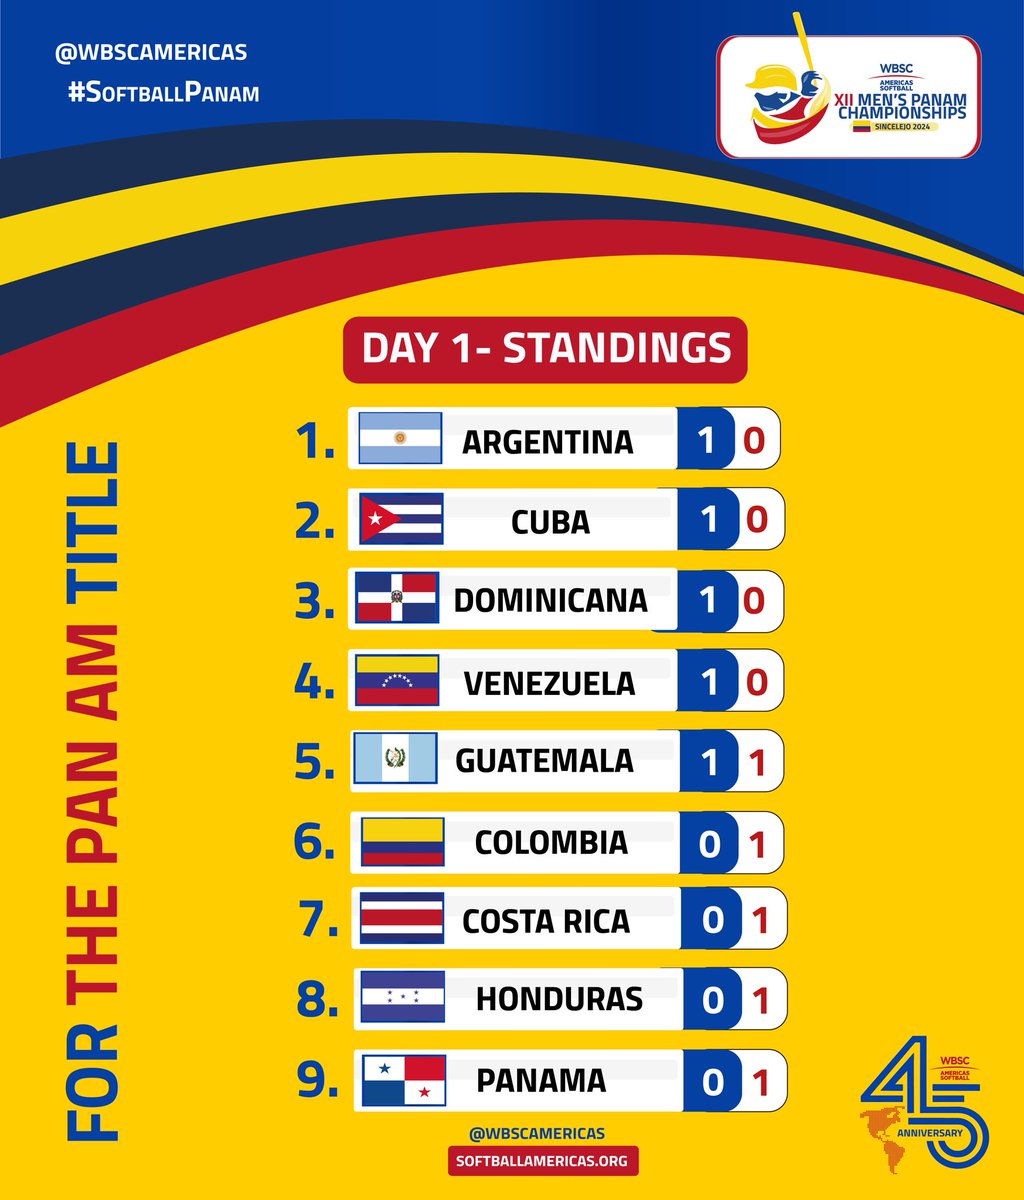 STANDINGS 🌎#DAY1 Opening Round 🔥 Mens PanAm #WBSC Americas Softball 🇦🇷🇨🇴🇨🇺🇩🇴🇵🇪🇻🇪🇵🇦🇭🇳🇨🇷 🎥Watch live : gametime.sport #MensPanAm #softballpanam #wbscamericas #softballamericas🌎